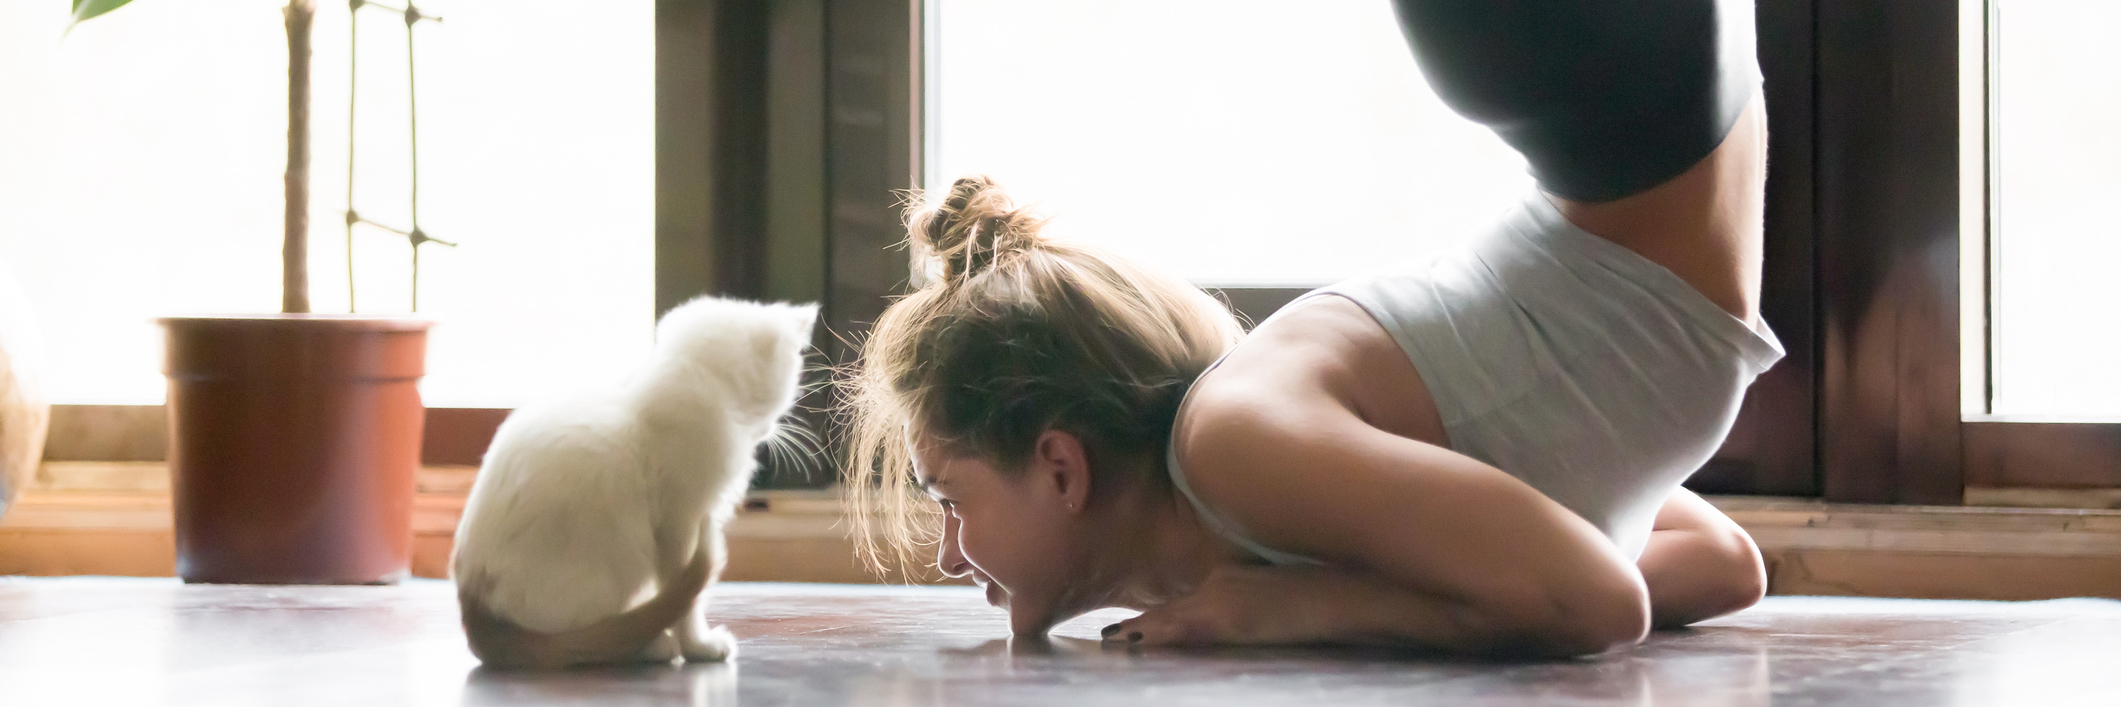 young woman practicing yoga scorpion pose with small white cat in front of her